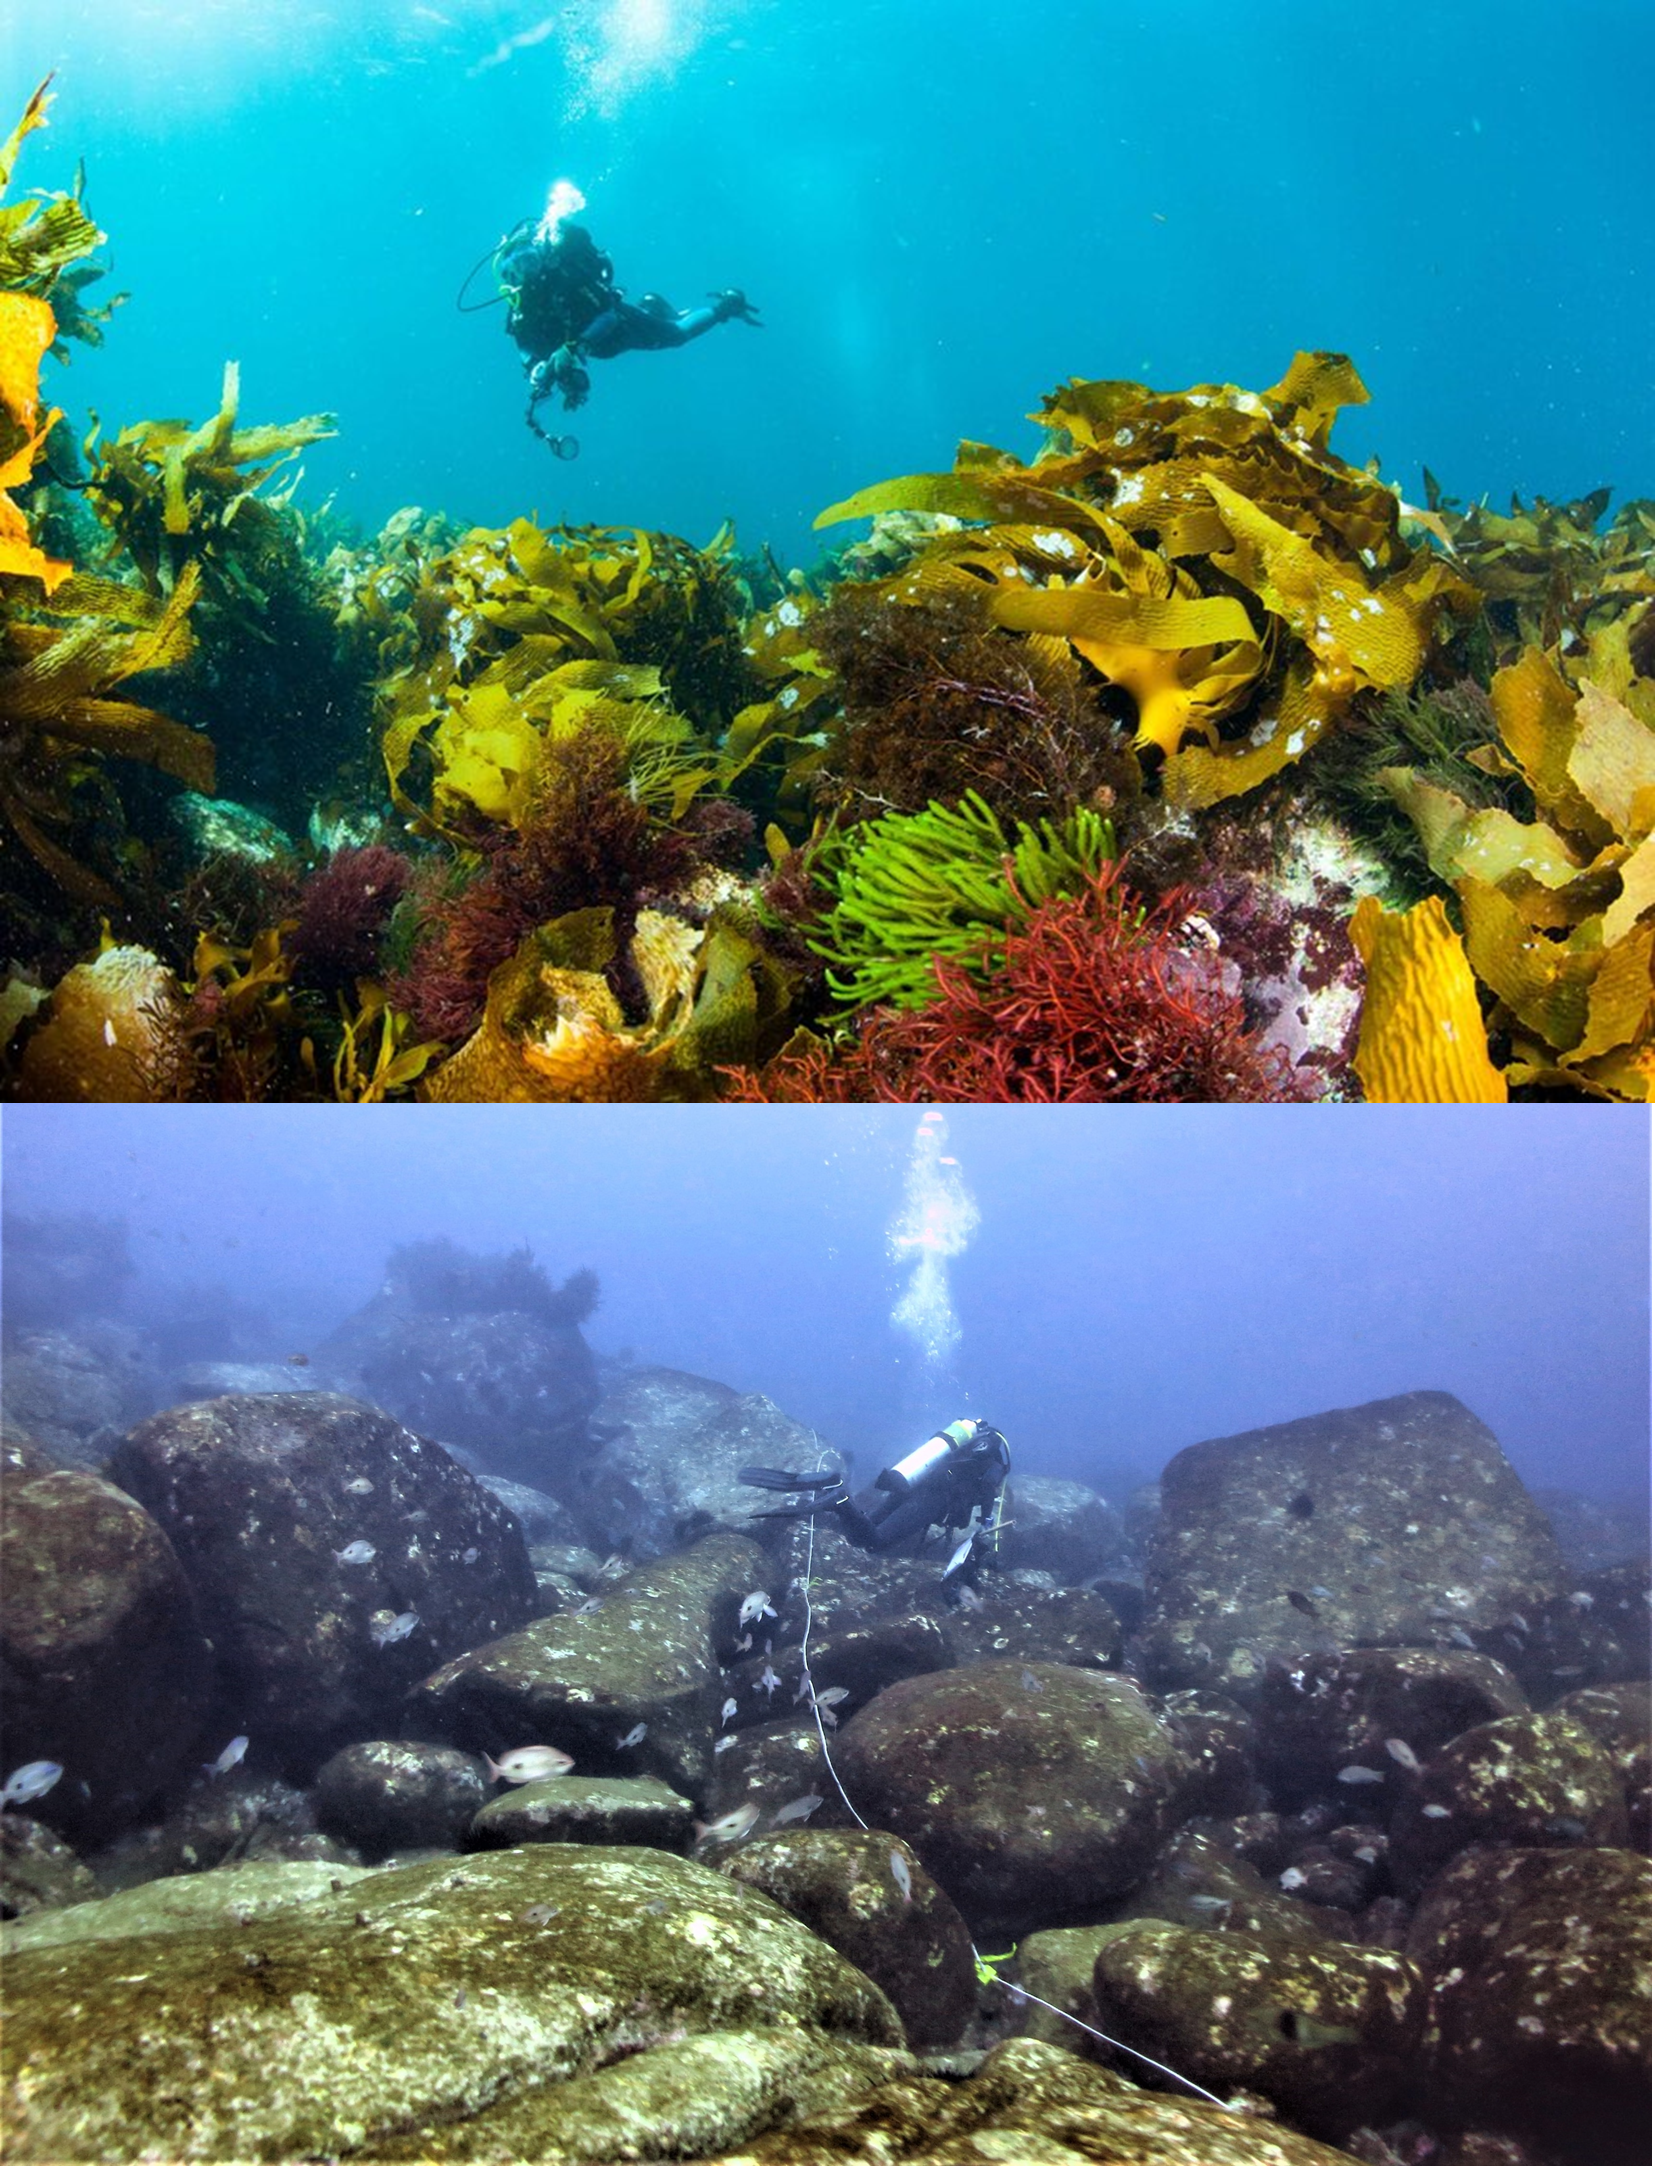 Two images: one of a healthy reef and one barren.